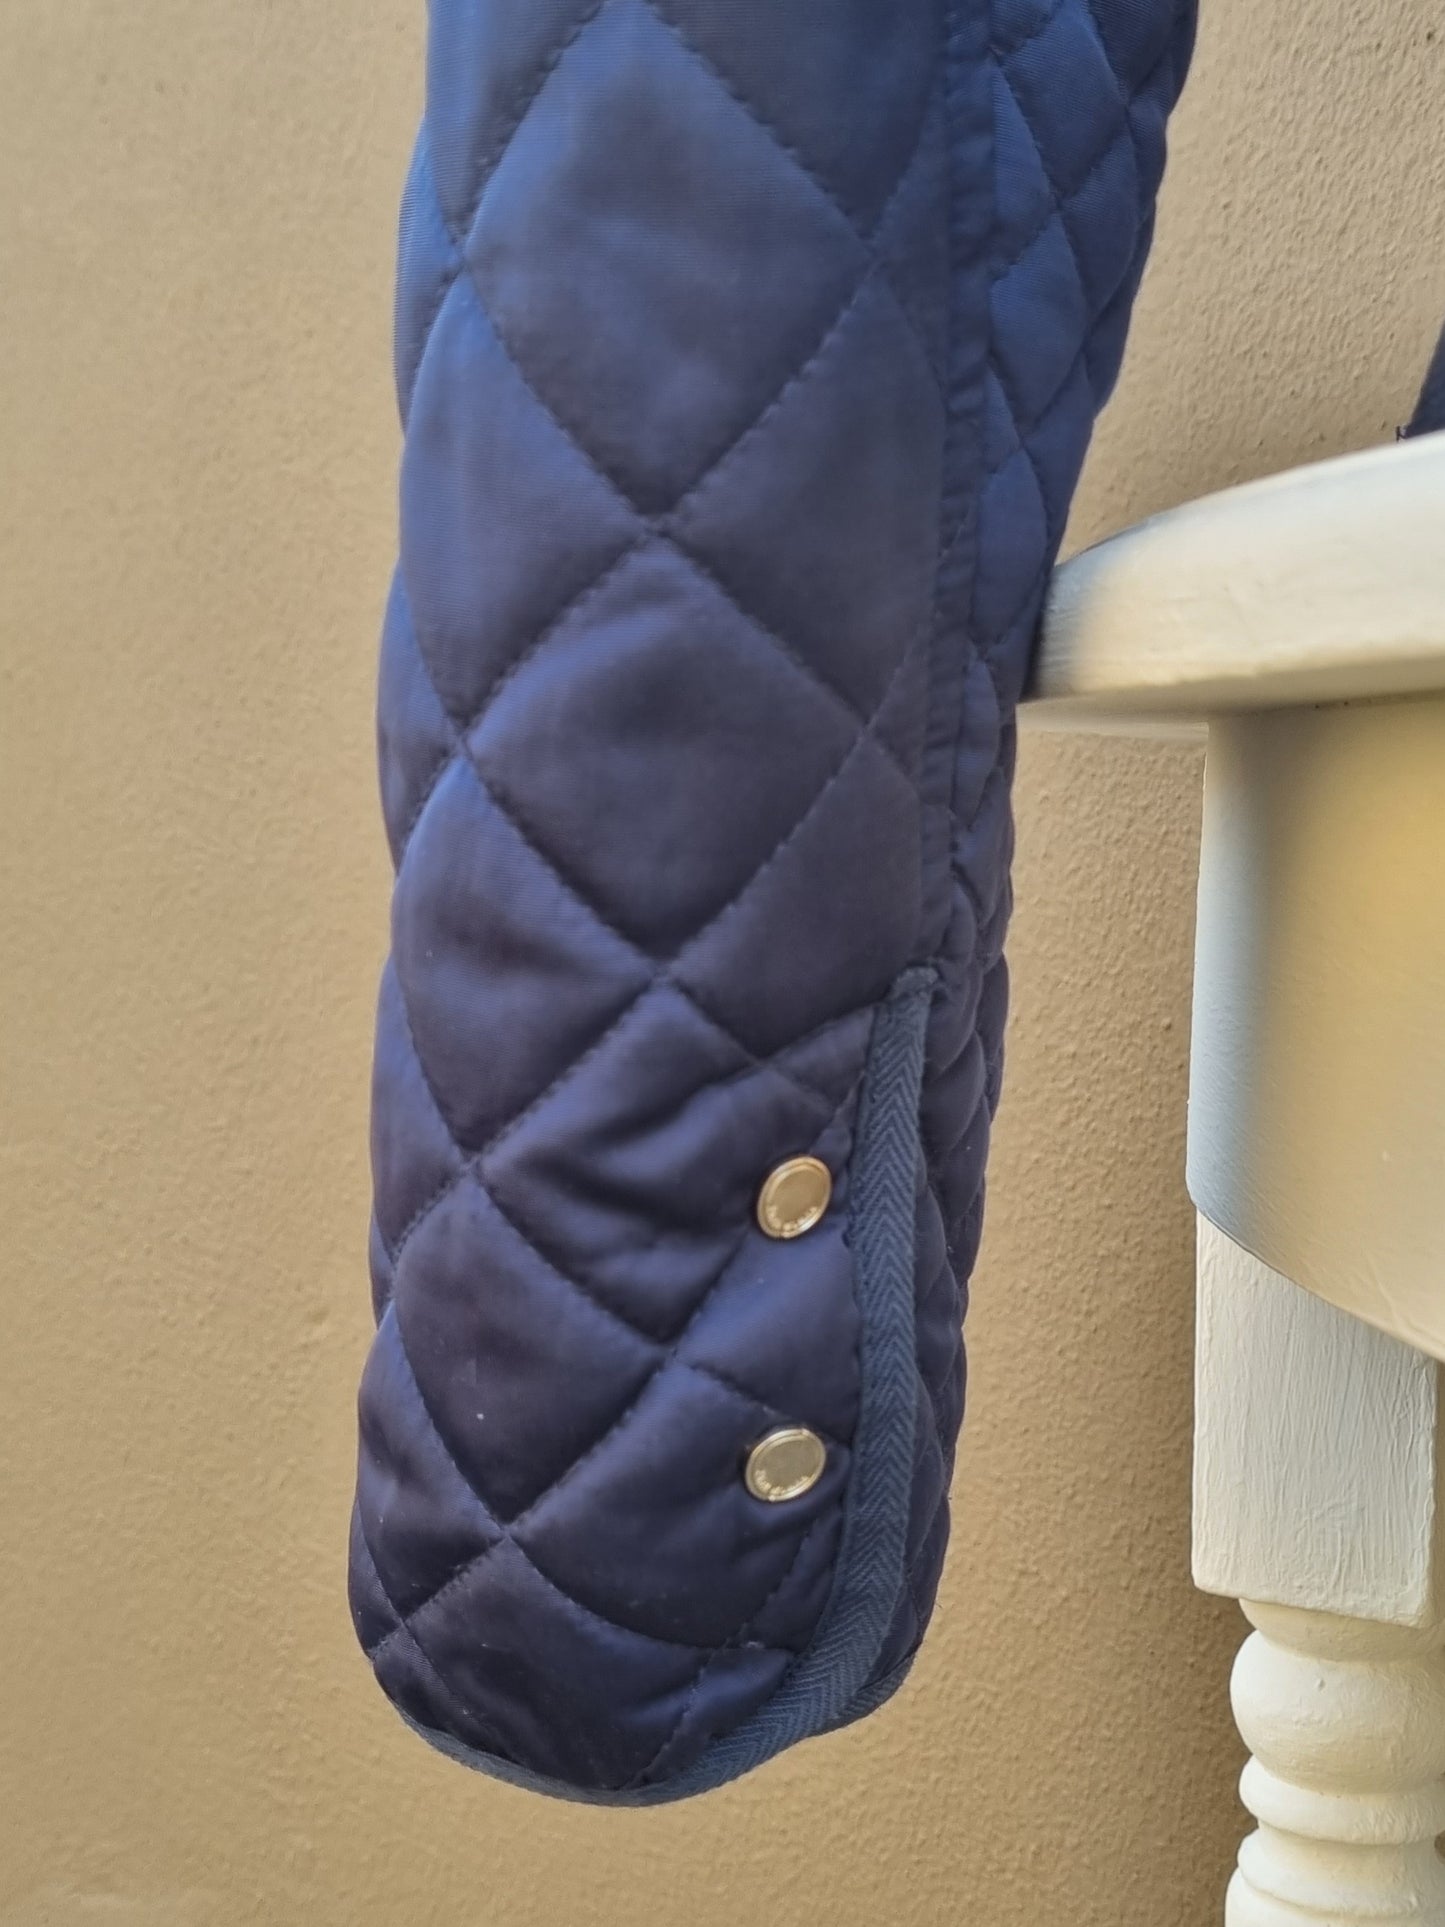 Zara Woman - Blue quilted mid waist jacket with front zip and size zip pockets